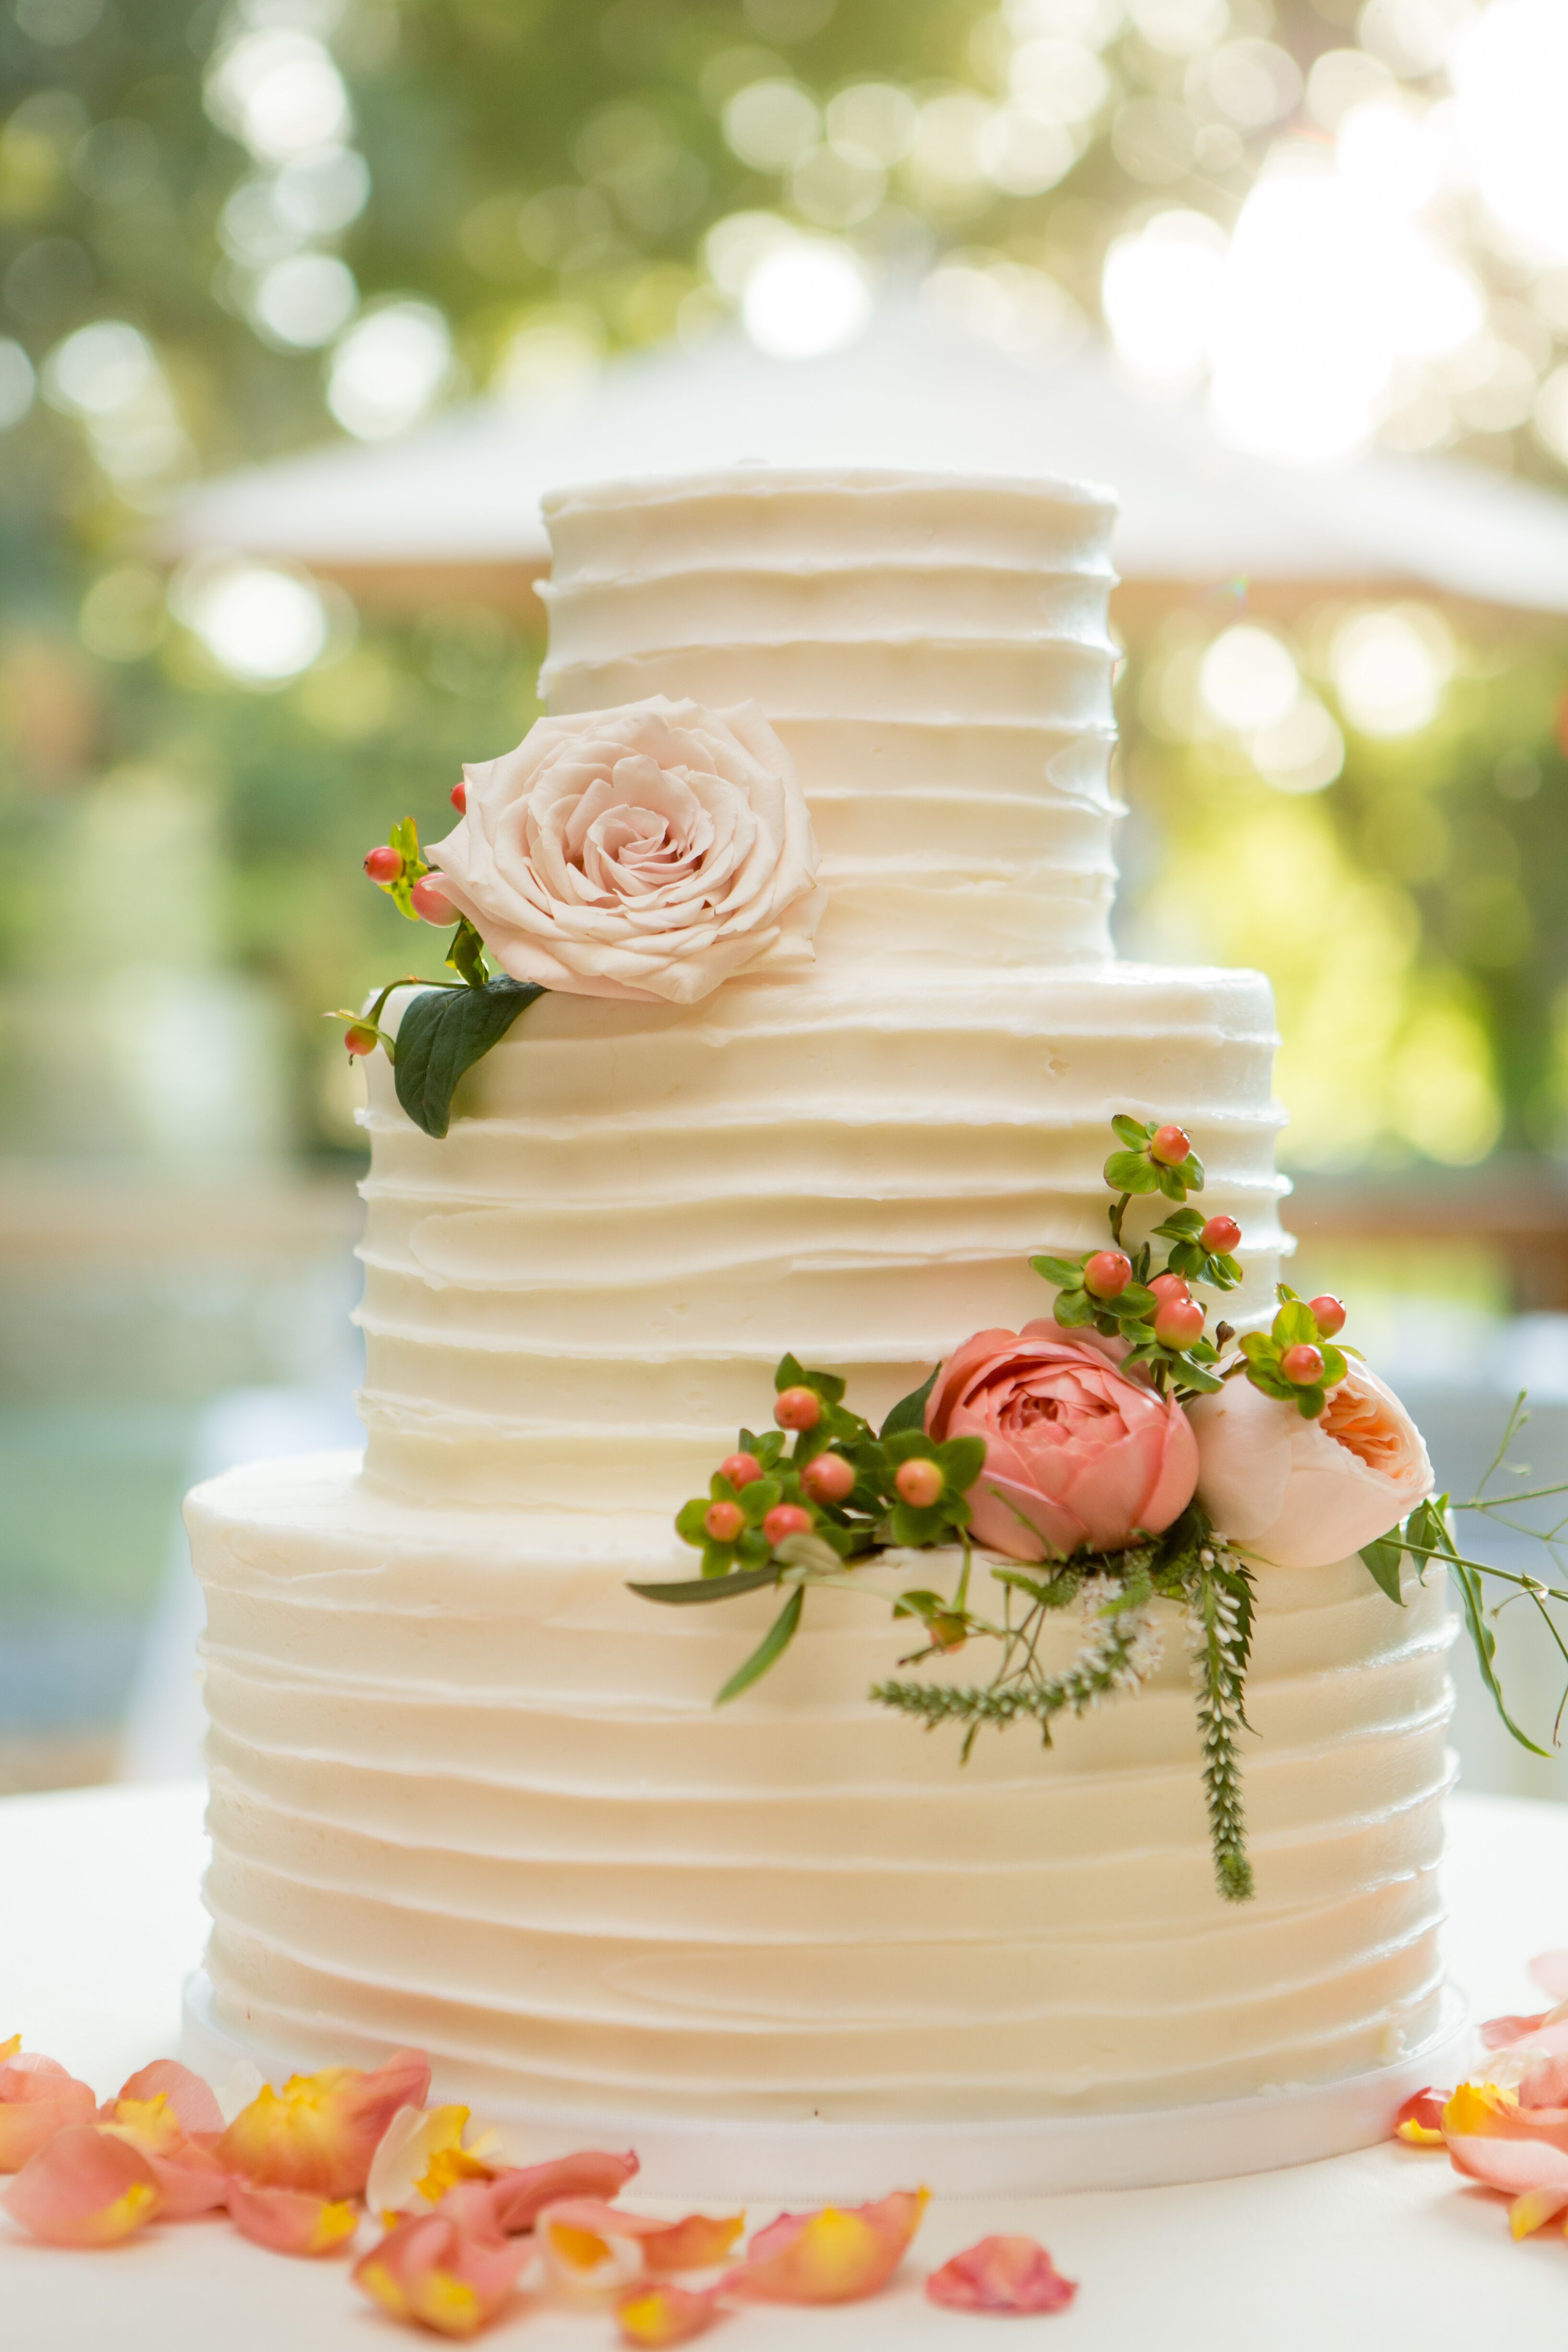 Classic, Simple RoughFrosted Wedding Cake